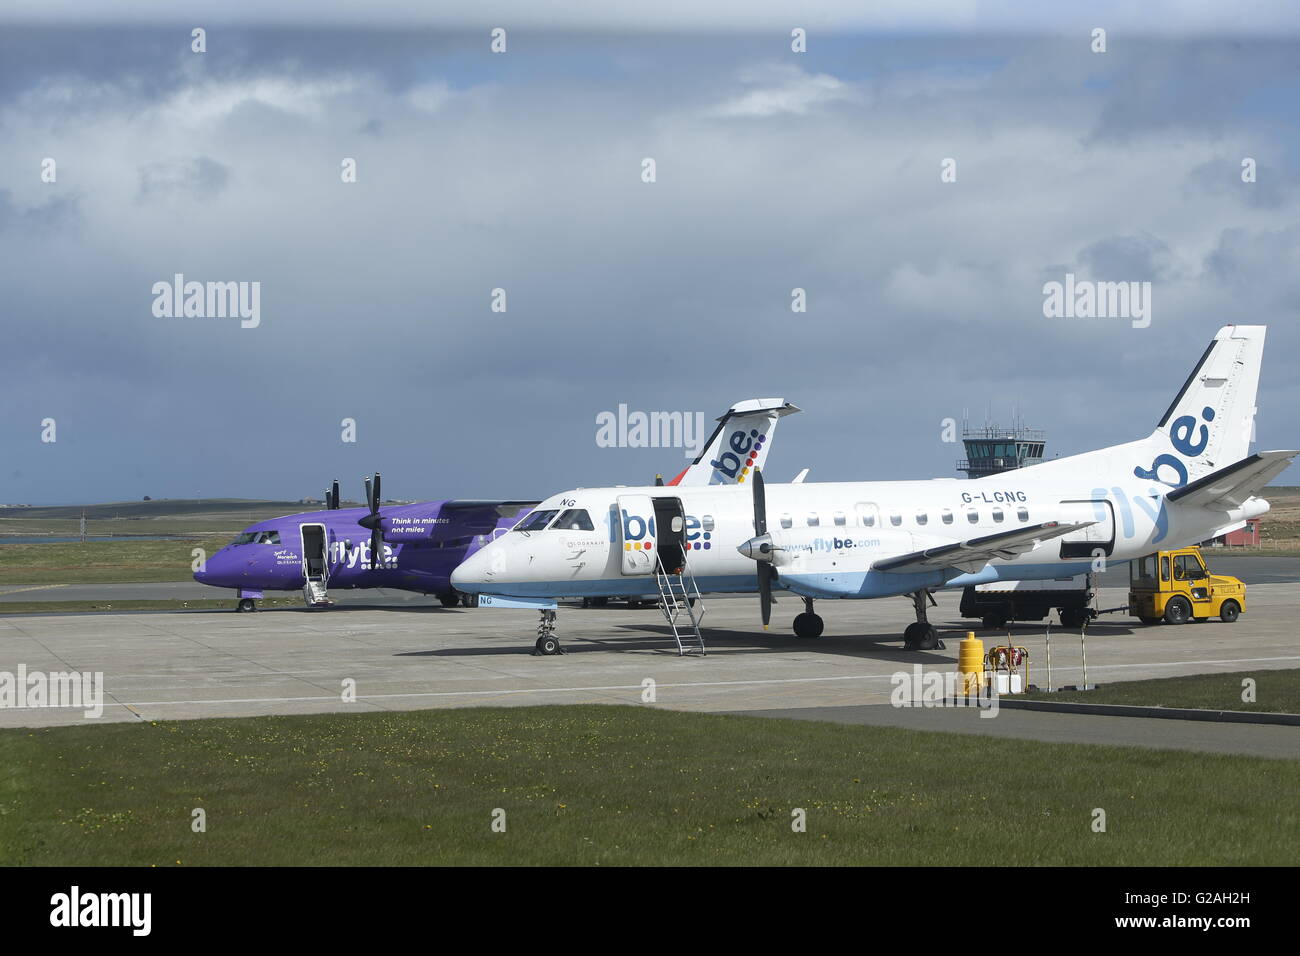 A Dornier 328 painted in the purple colours of Loganair, a Flybe franchise partner, and a Loganair G-LGNG (Saab 340 - MSN 327) at Kirkwall airport. Stock Photo